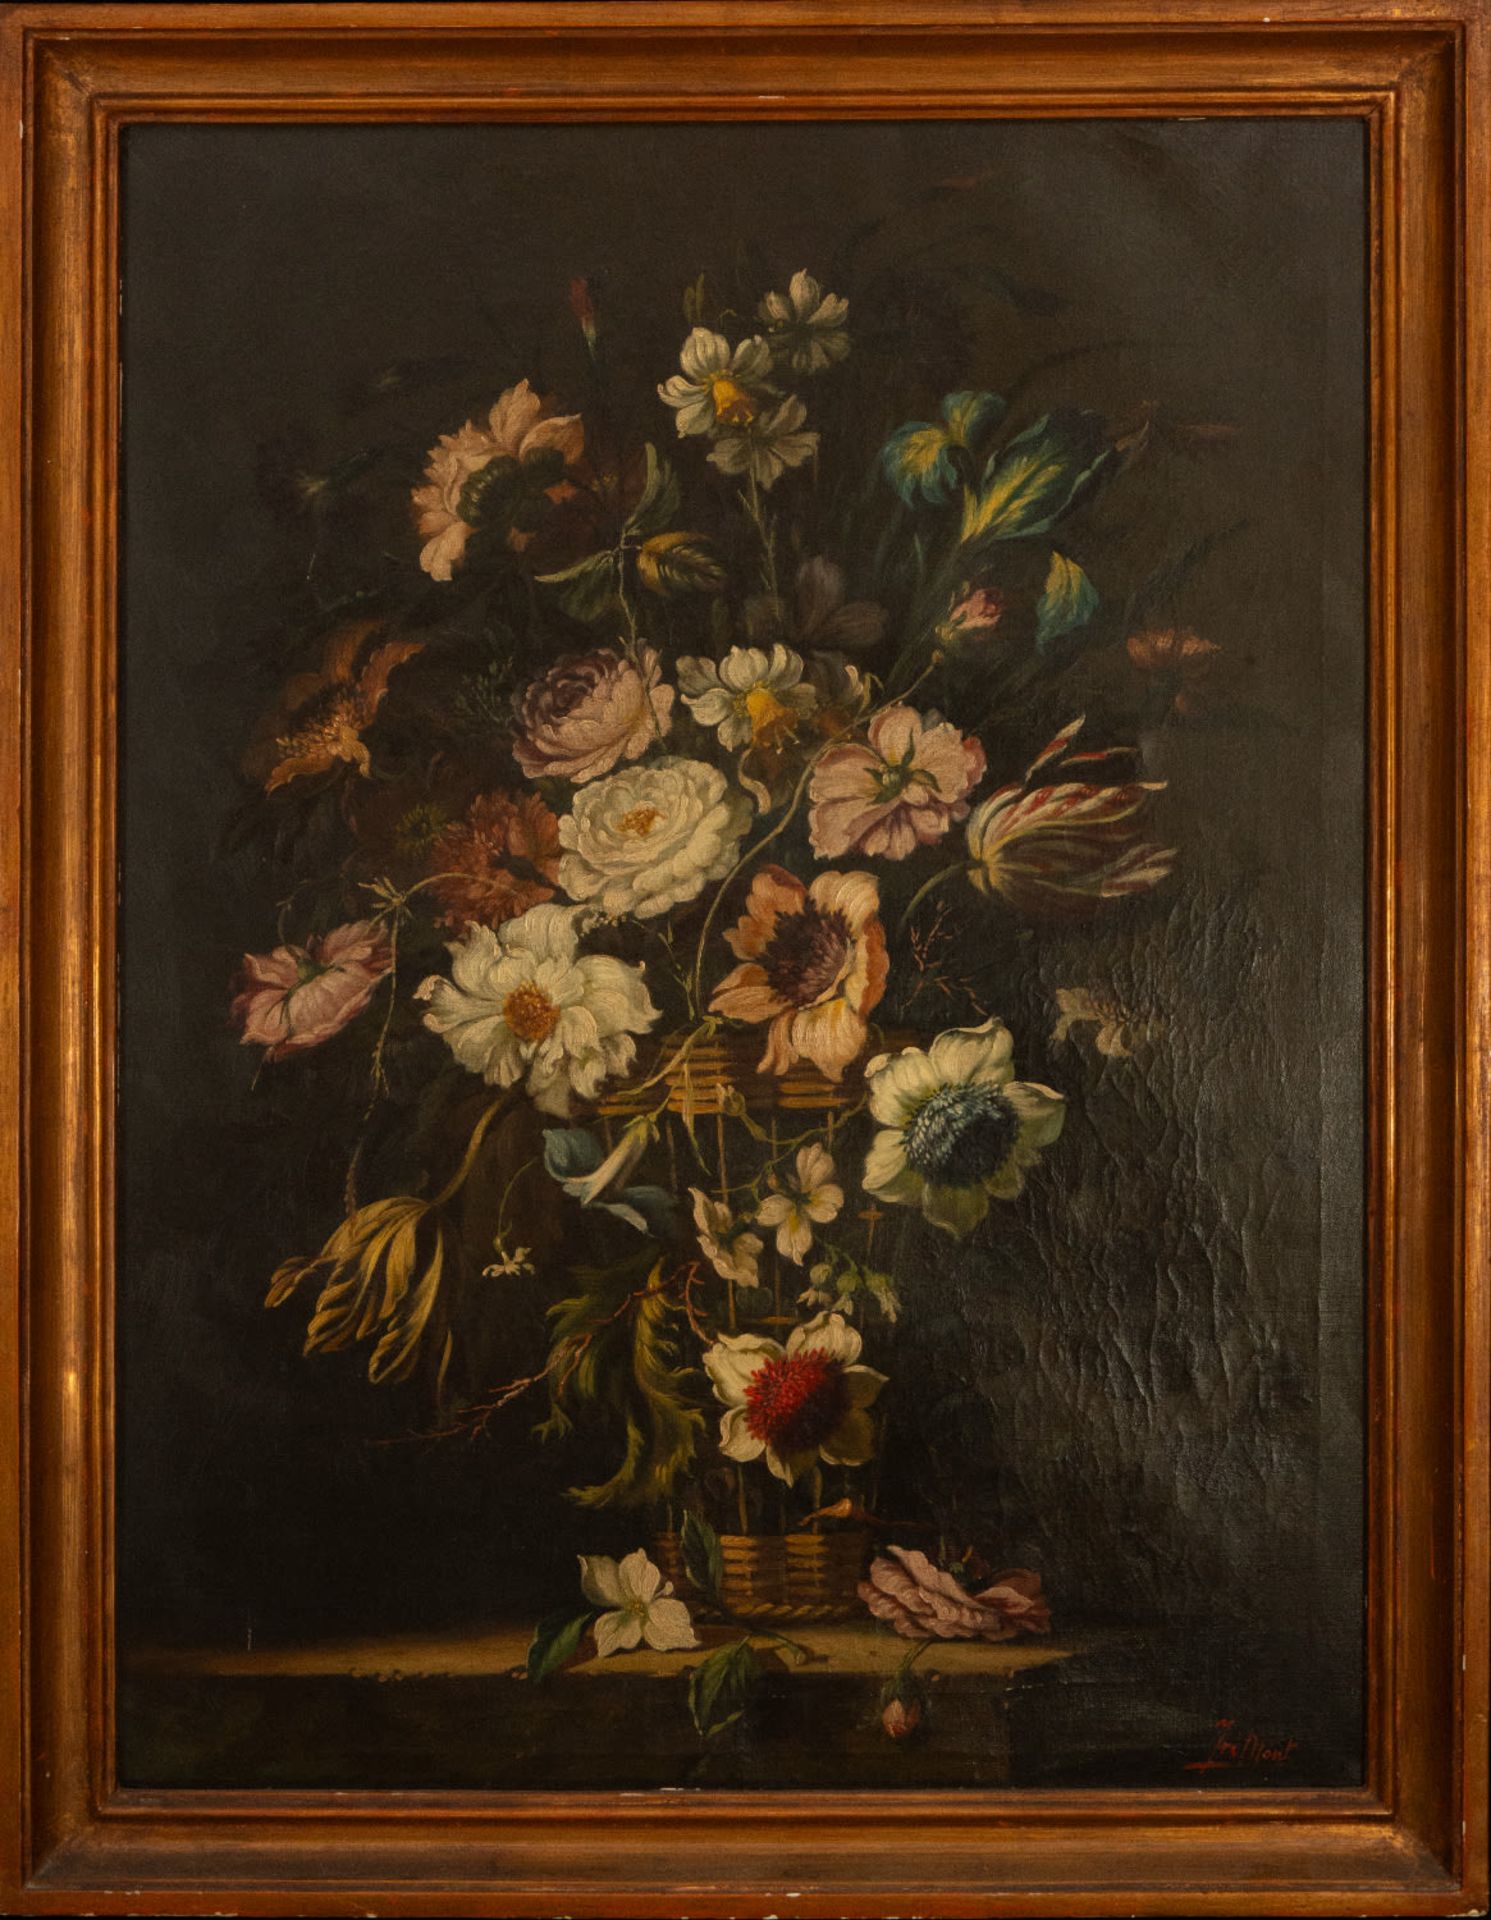 Still life of Flowers on canvas, Belgian or French school, signed J. Rimont, 19th century